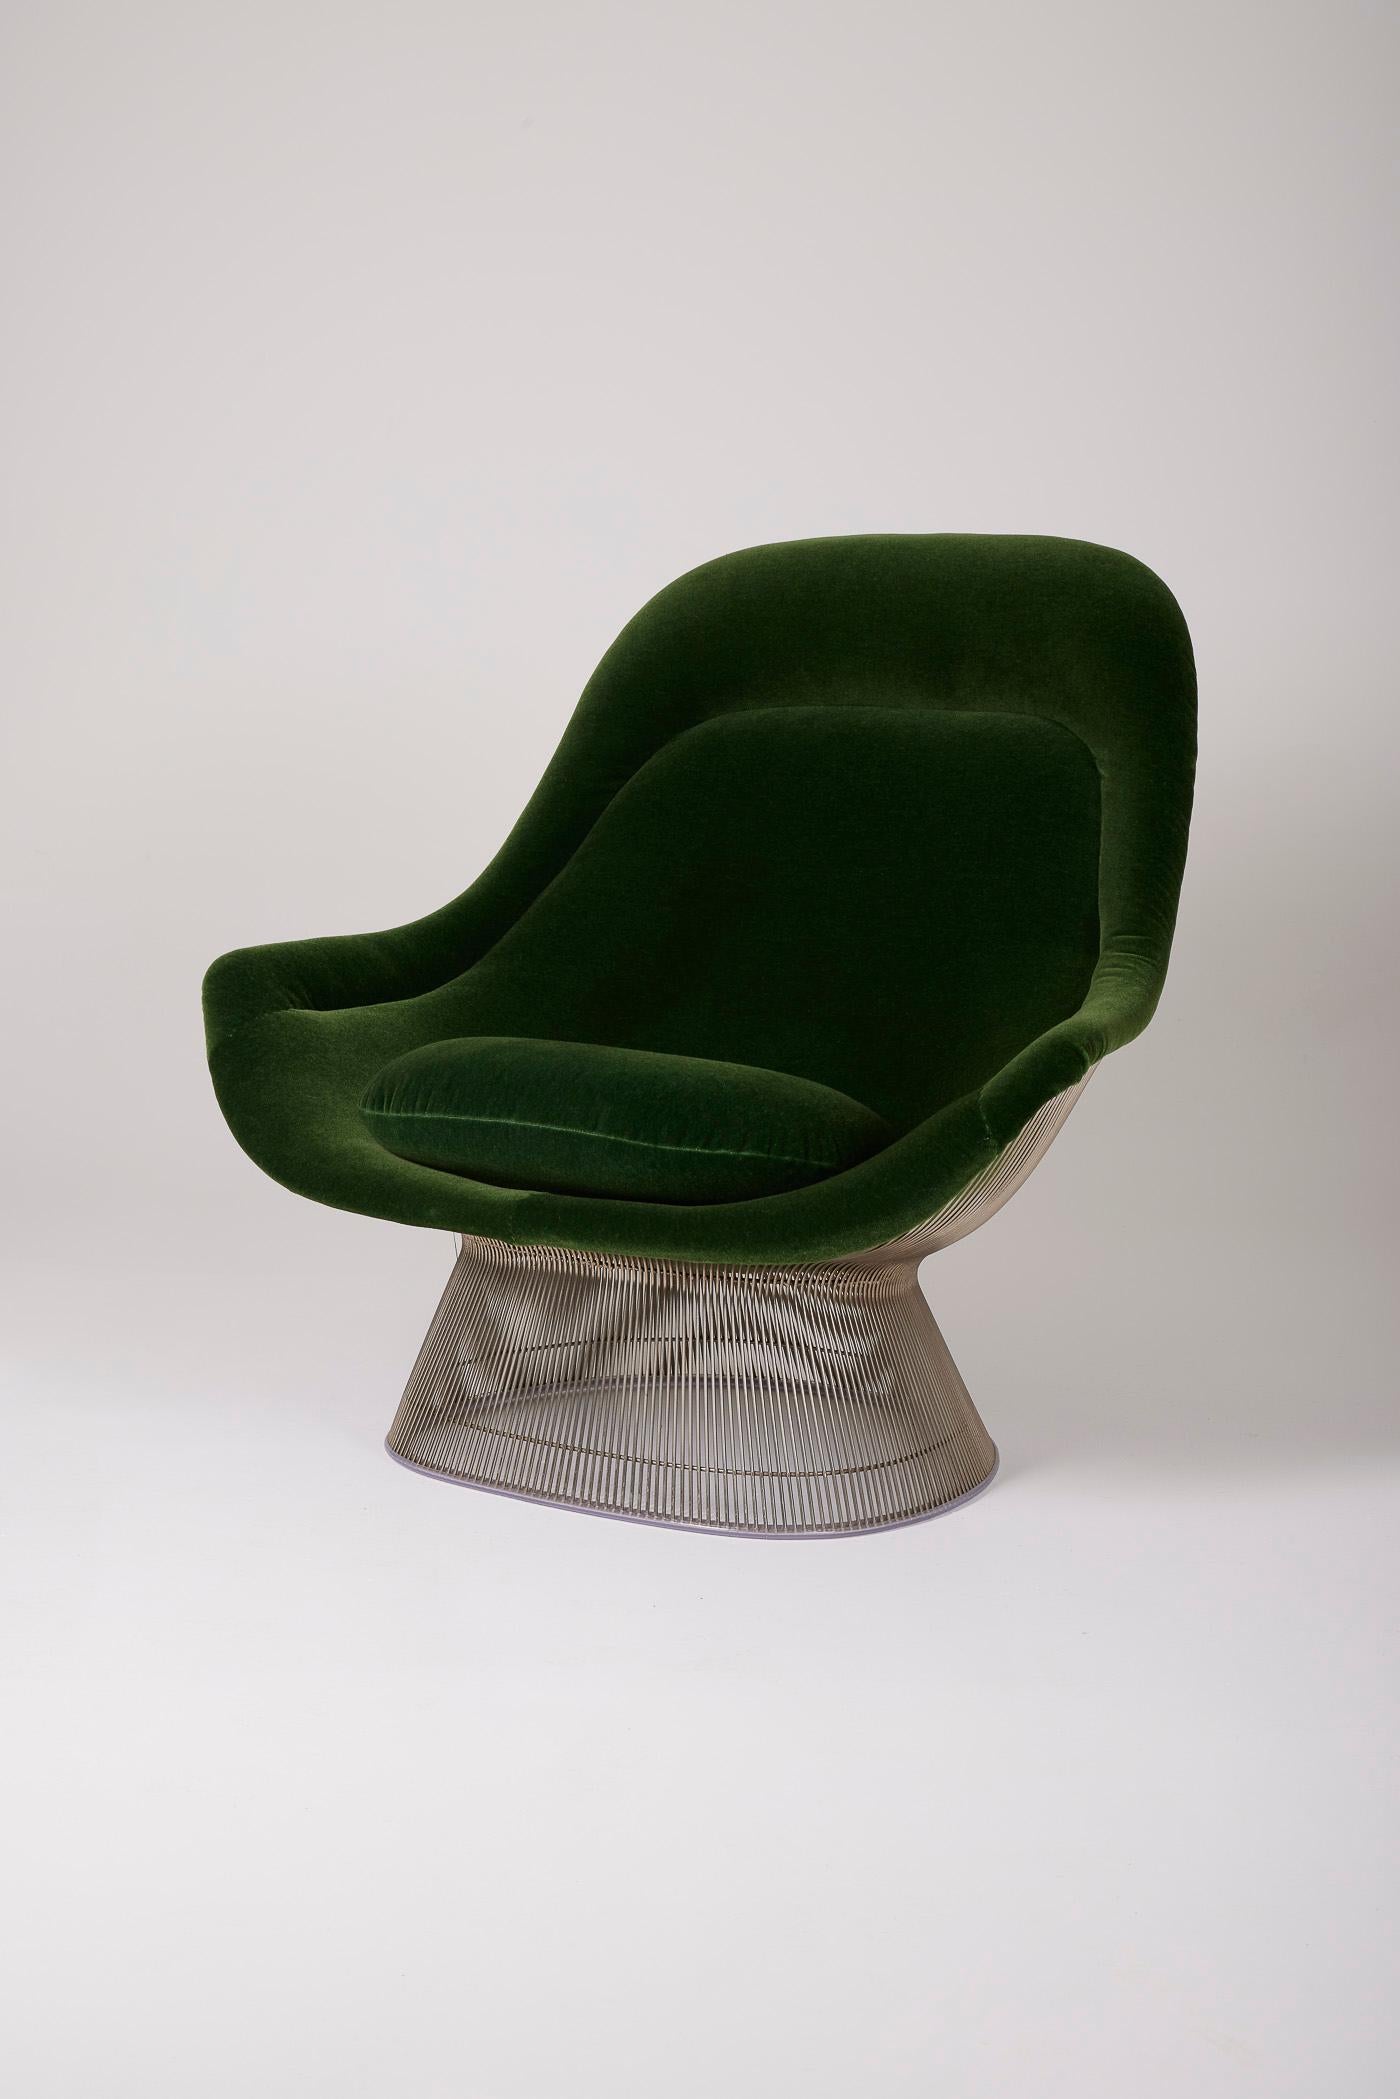 Chromed metal armchair by designer Warren Platner (1919-2006) produced by Knoll in the 1970s. The seat and back are in green velvet, the structure and base are in chromed metal. The Platner armchair is a design classic from the 